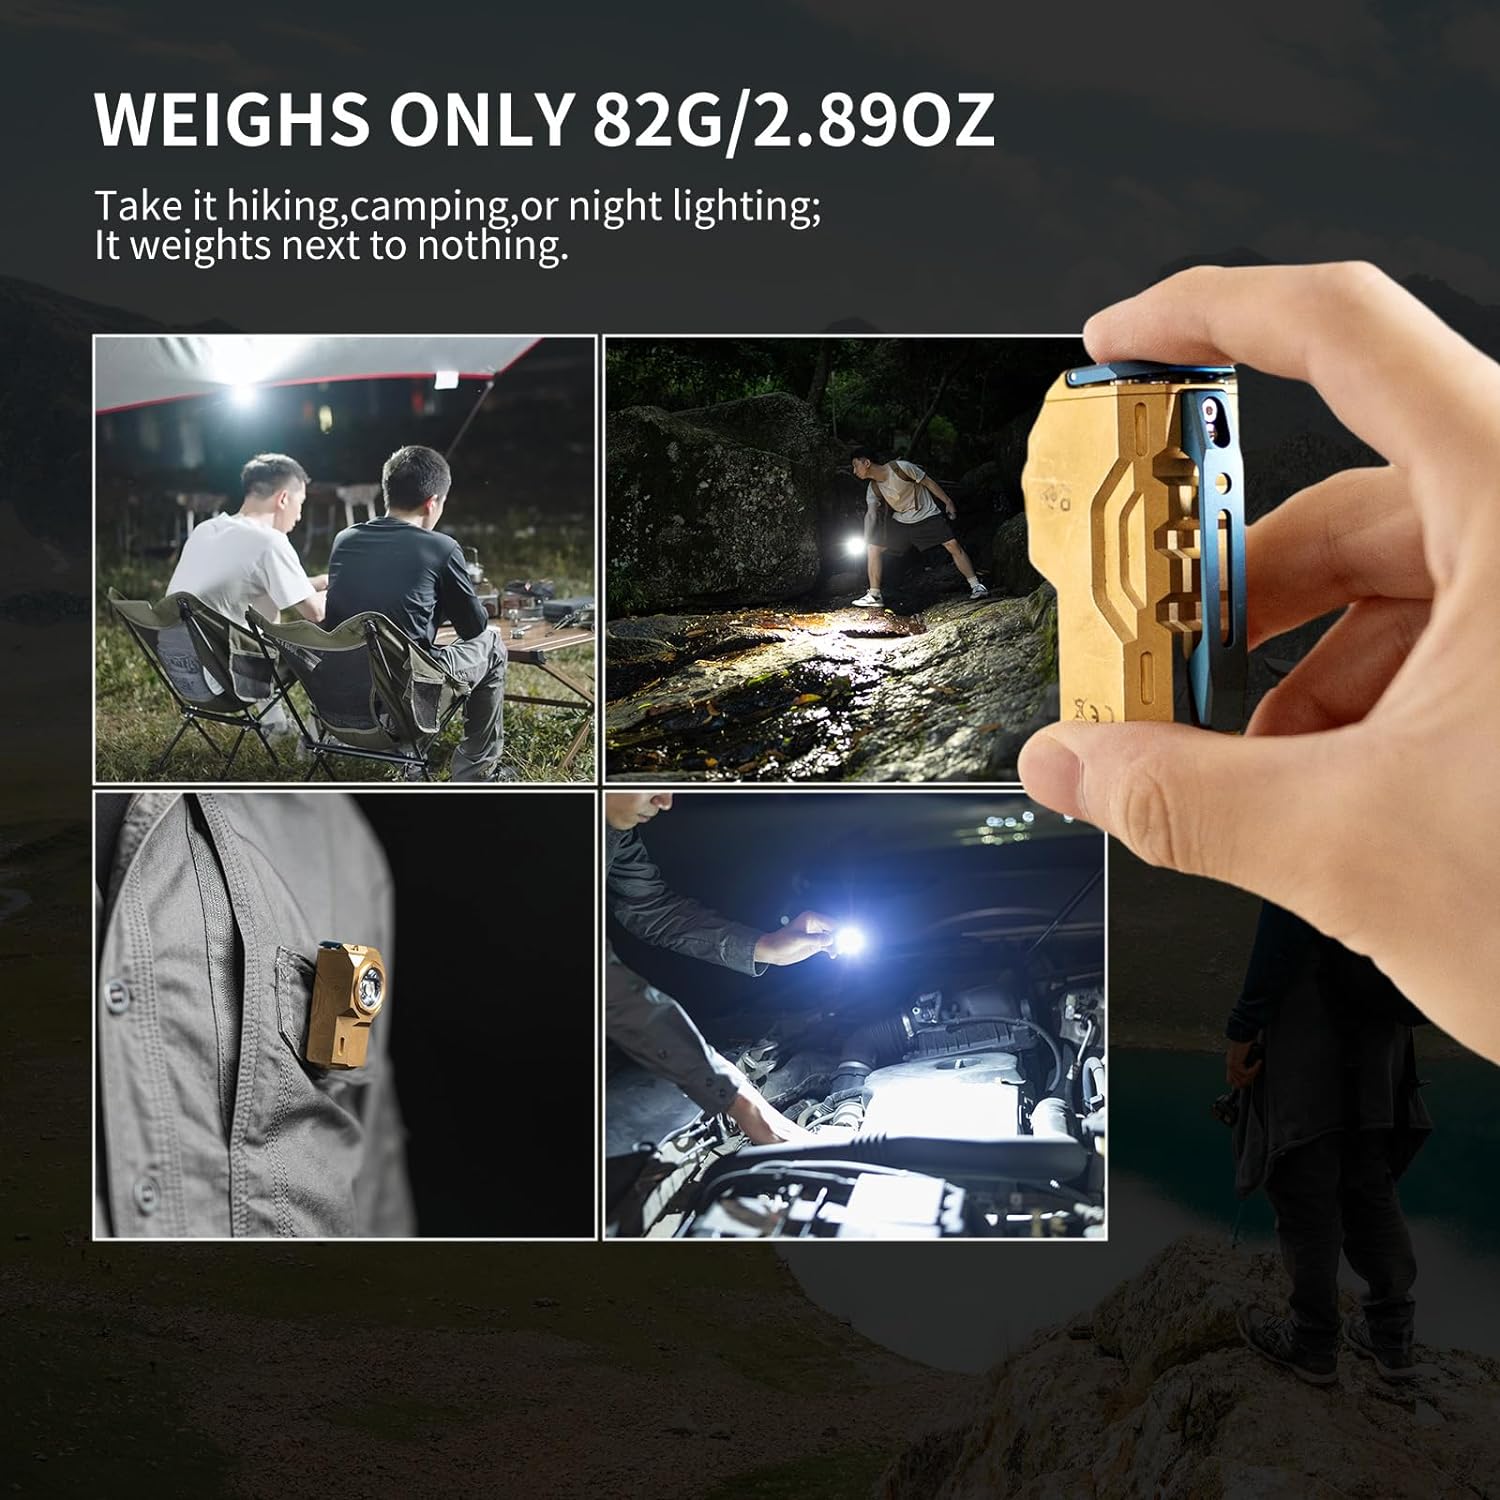 WUBEN X0 Rechargeable Mini Flashlight with Clip, 900 High Lumens Small Pocket LED Flashlights, 175° Floodlight Right Angle Magnetic Flashlight, Super Bright 7 Modes for Hiking, Camping, Everyday Use